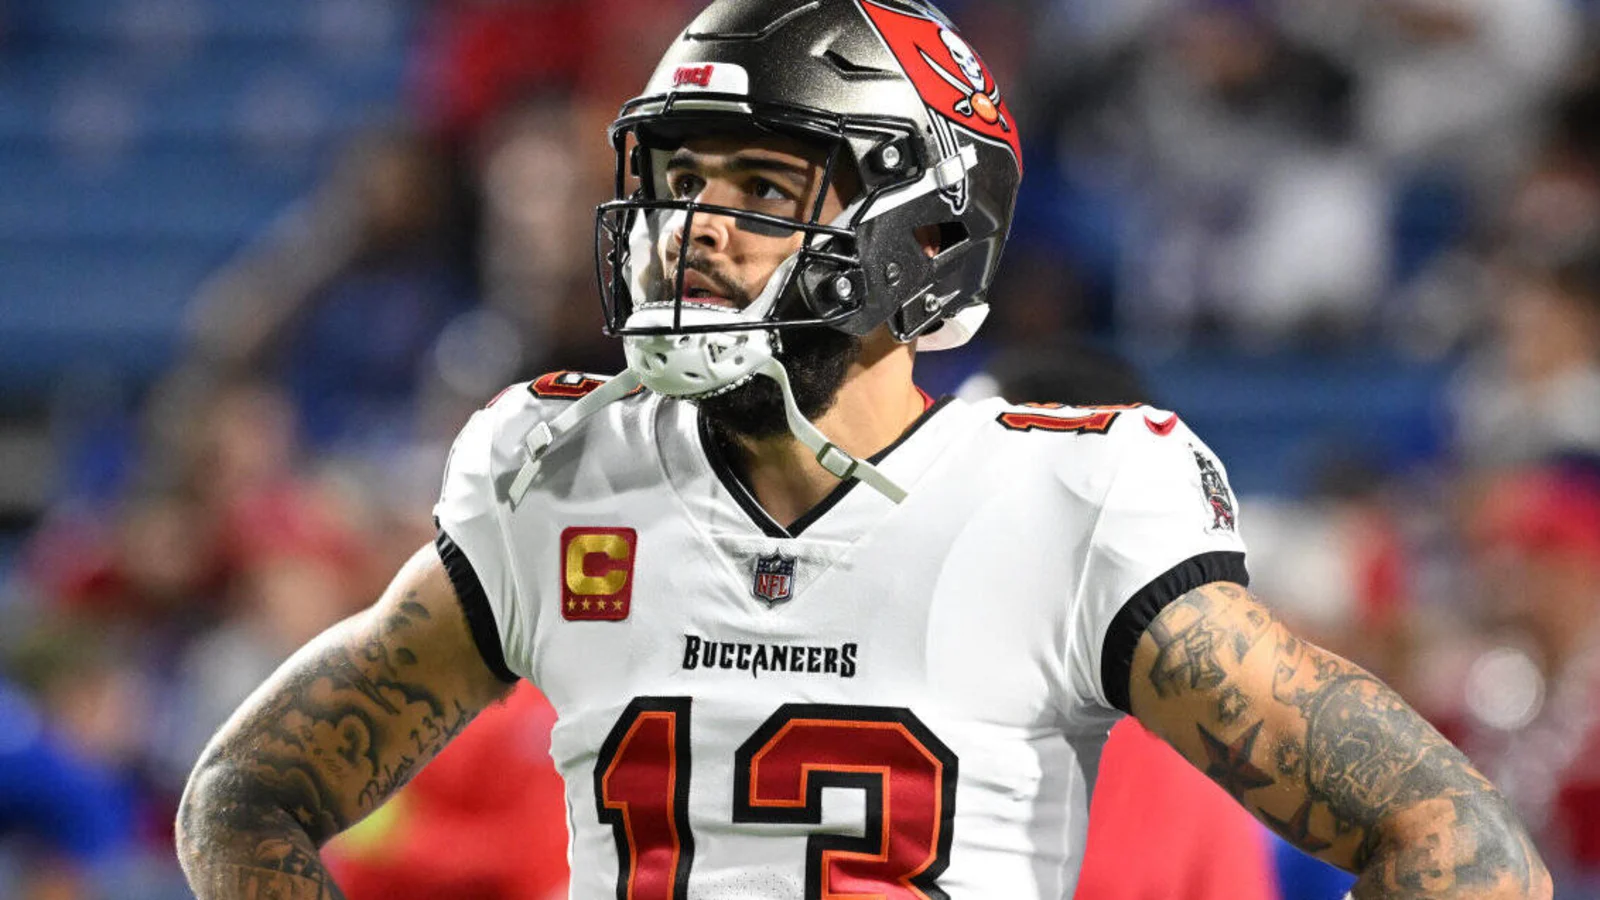 Big Bucks for Big Catches: How Mike Evans' Huge Deal Sparks Hope for NFL's Young Stars